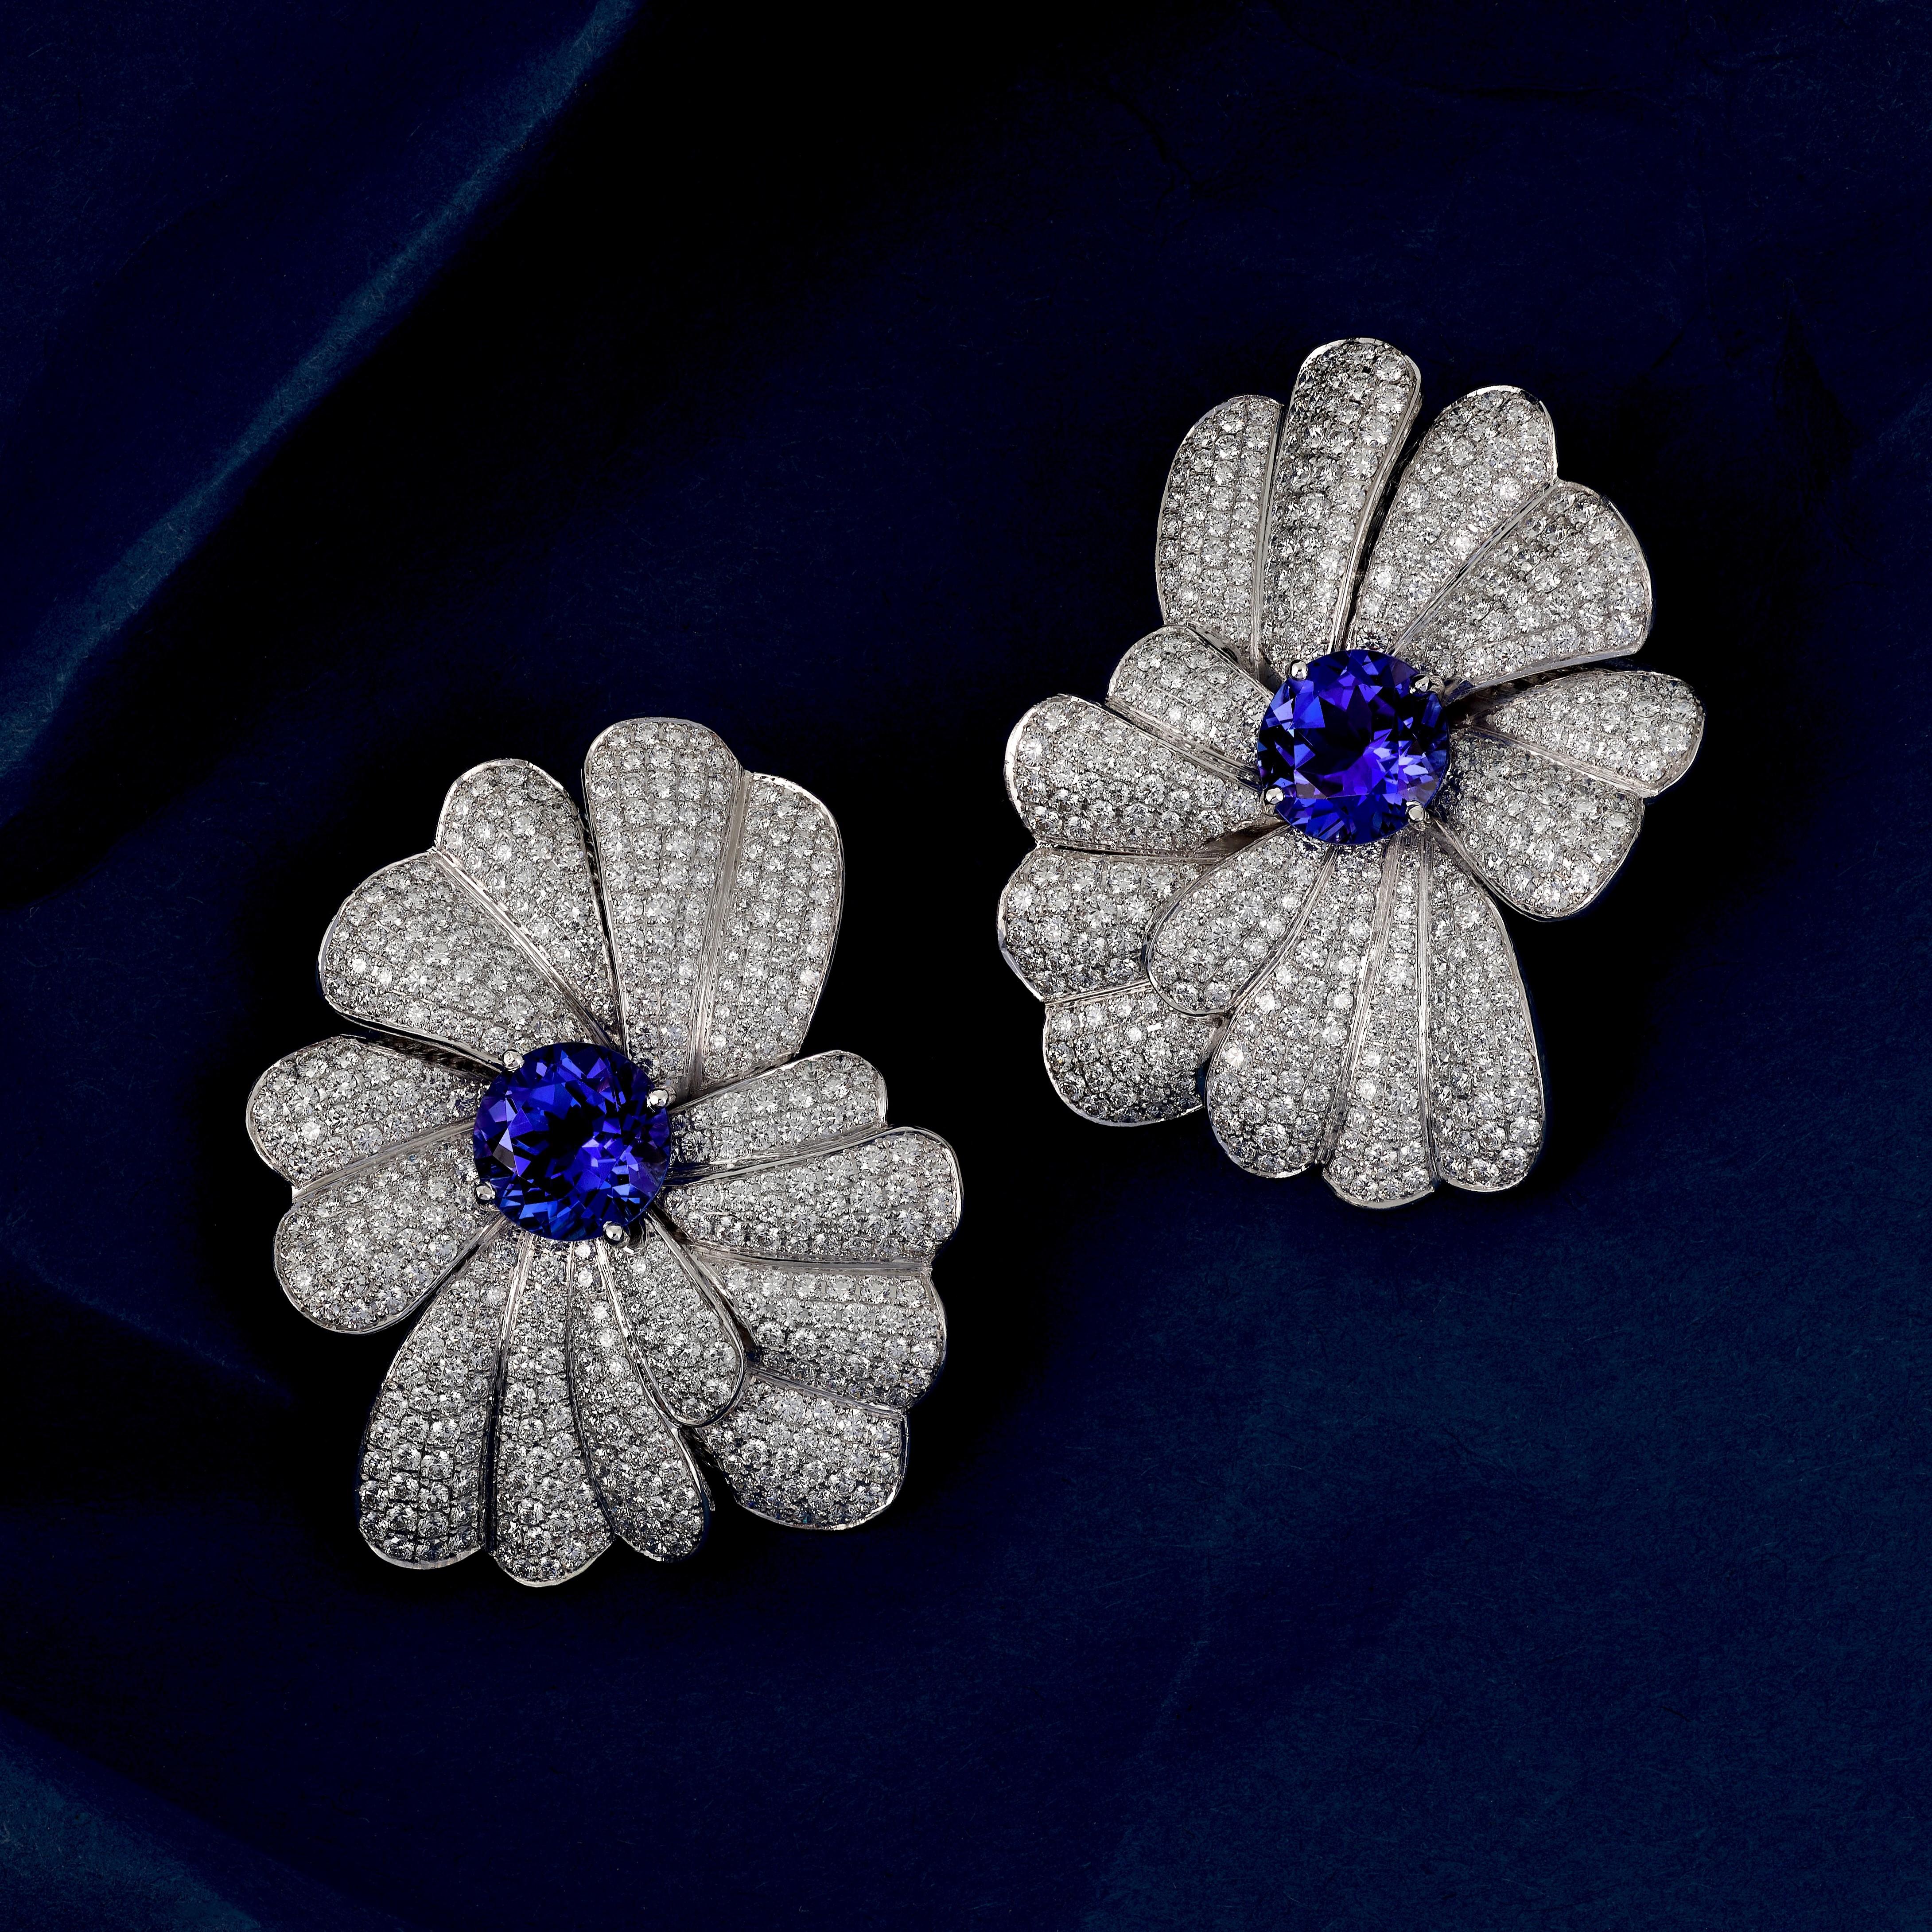 Contemporary Tanzanite and Diamond Drop Earrings set in White Gold